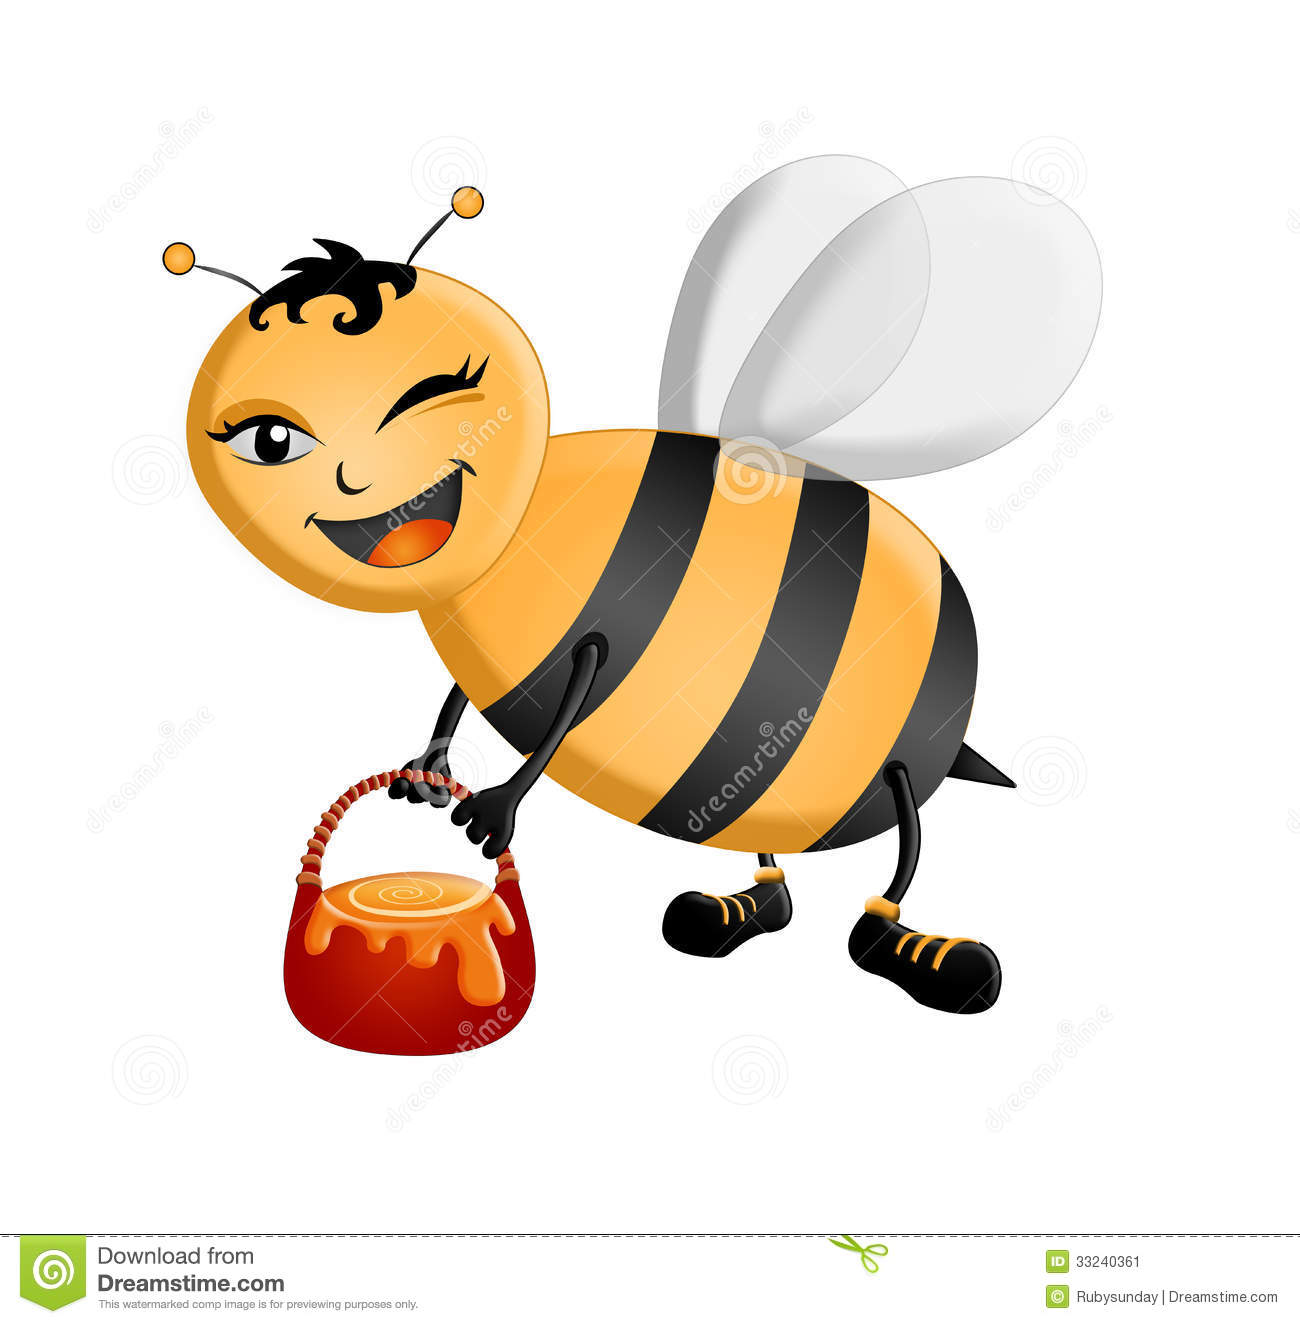 Busy Bee Stock Image   Image  33240361